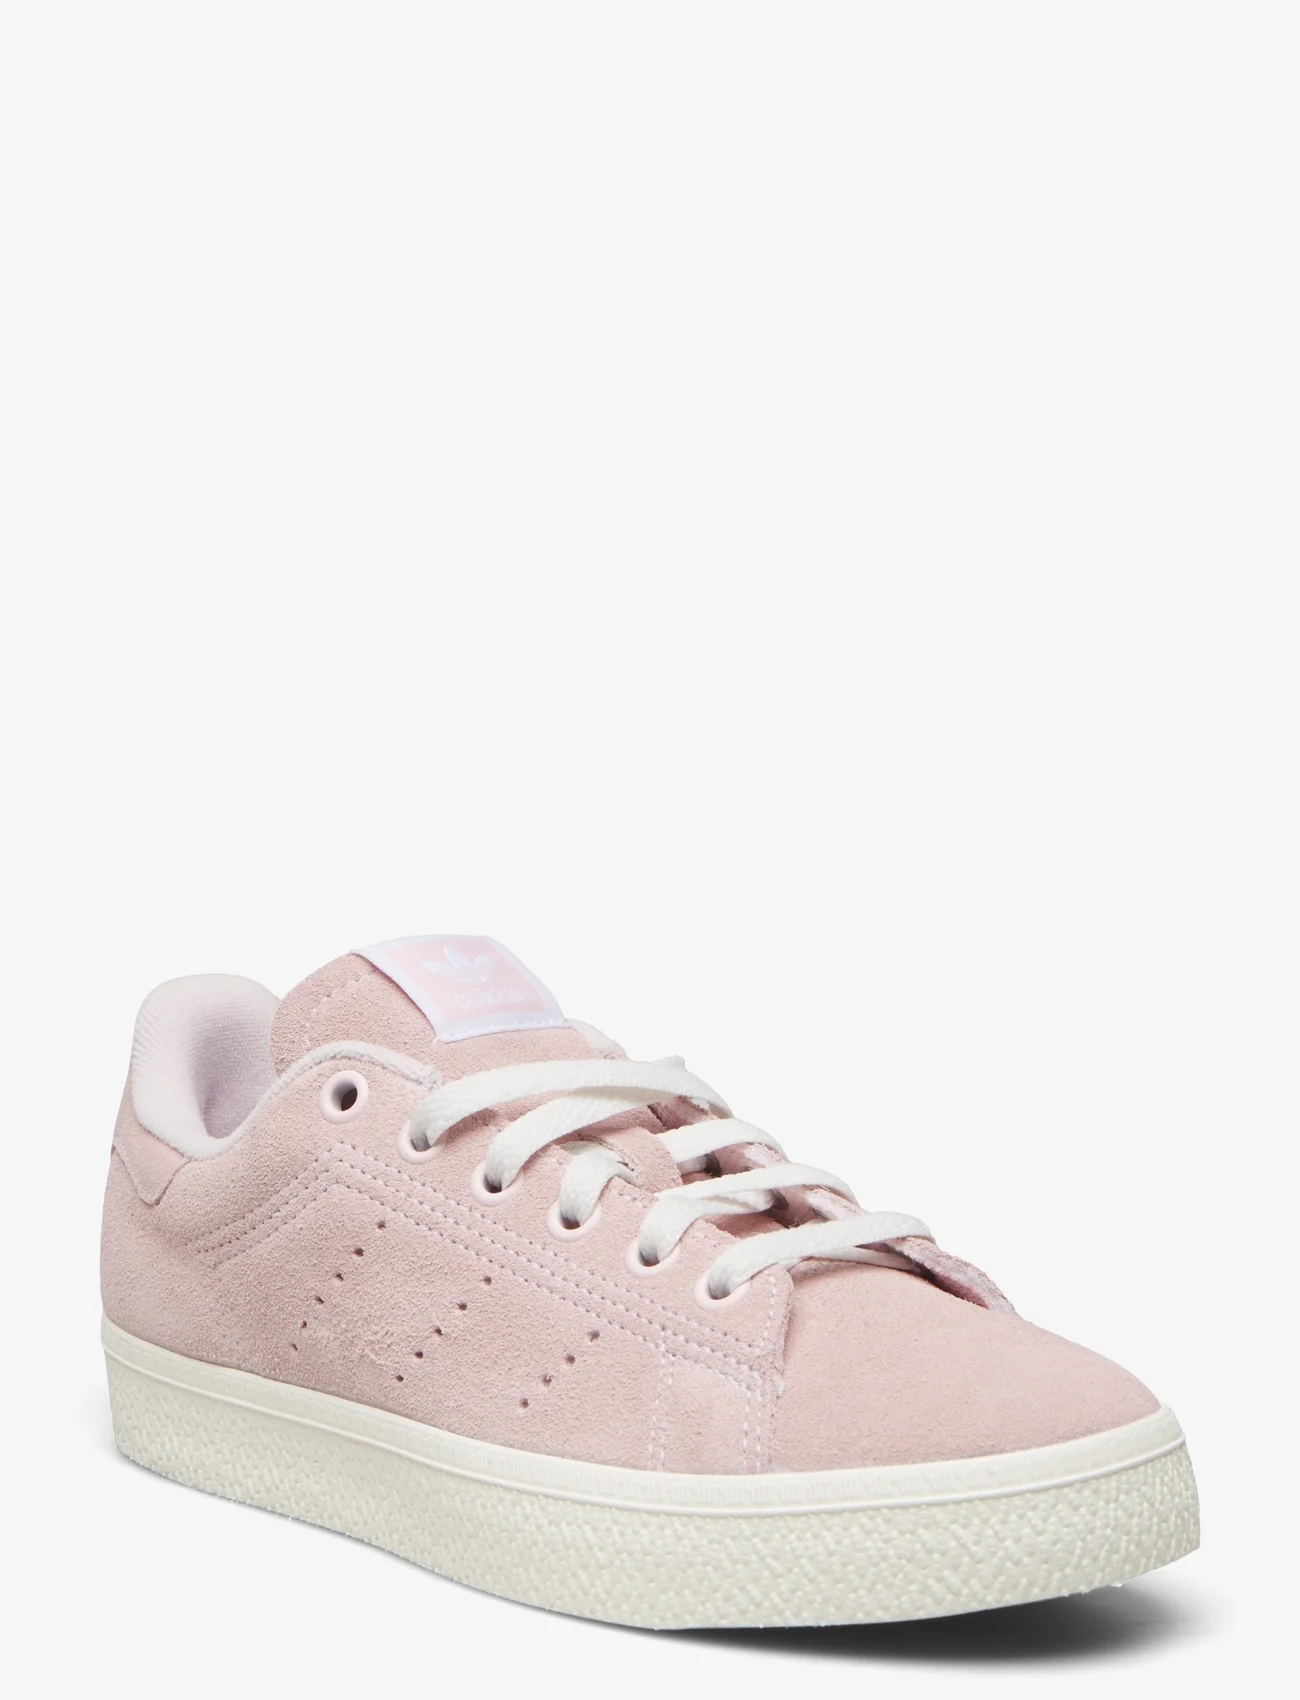 adidas Originals - STAN SMITH CS W - sneakers med lavt skaft - clpink/ftwwht/cwhite - 0